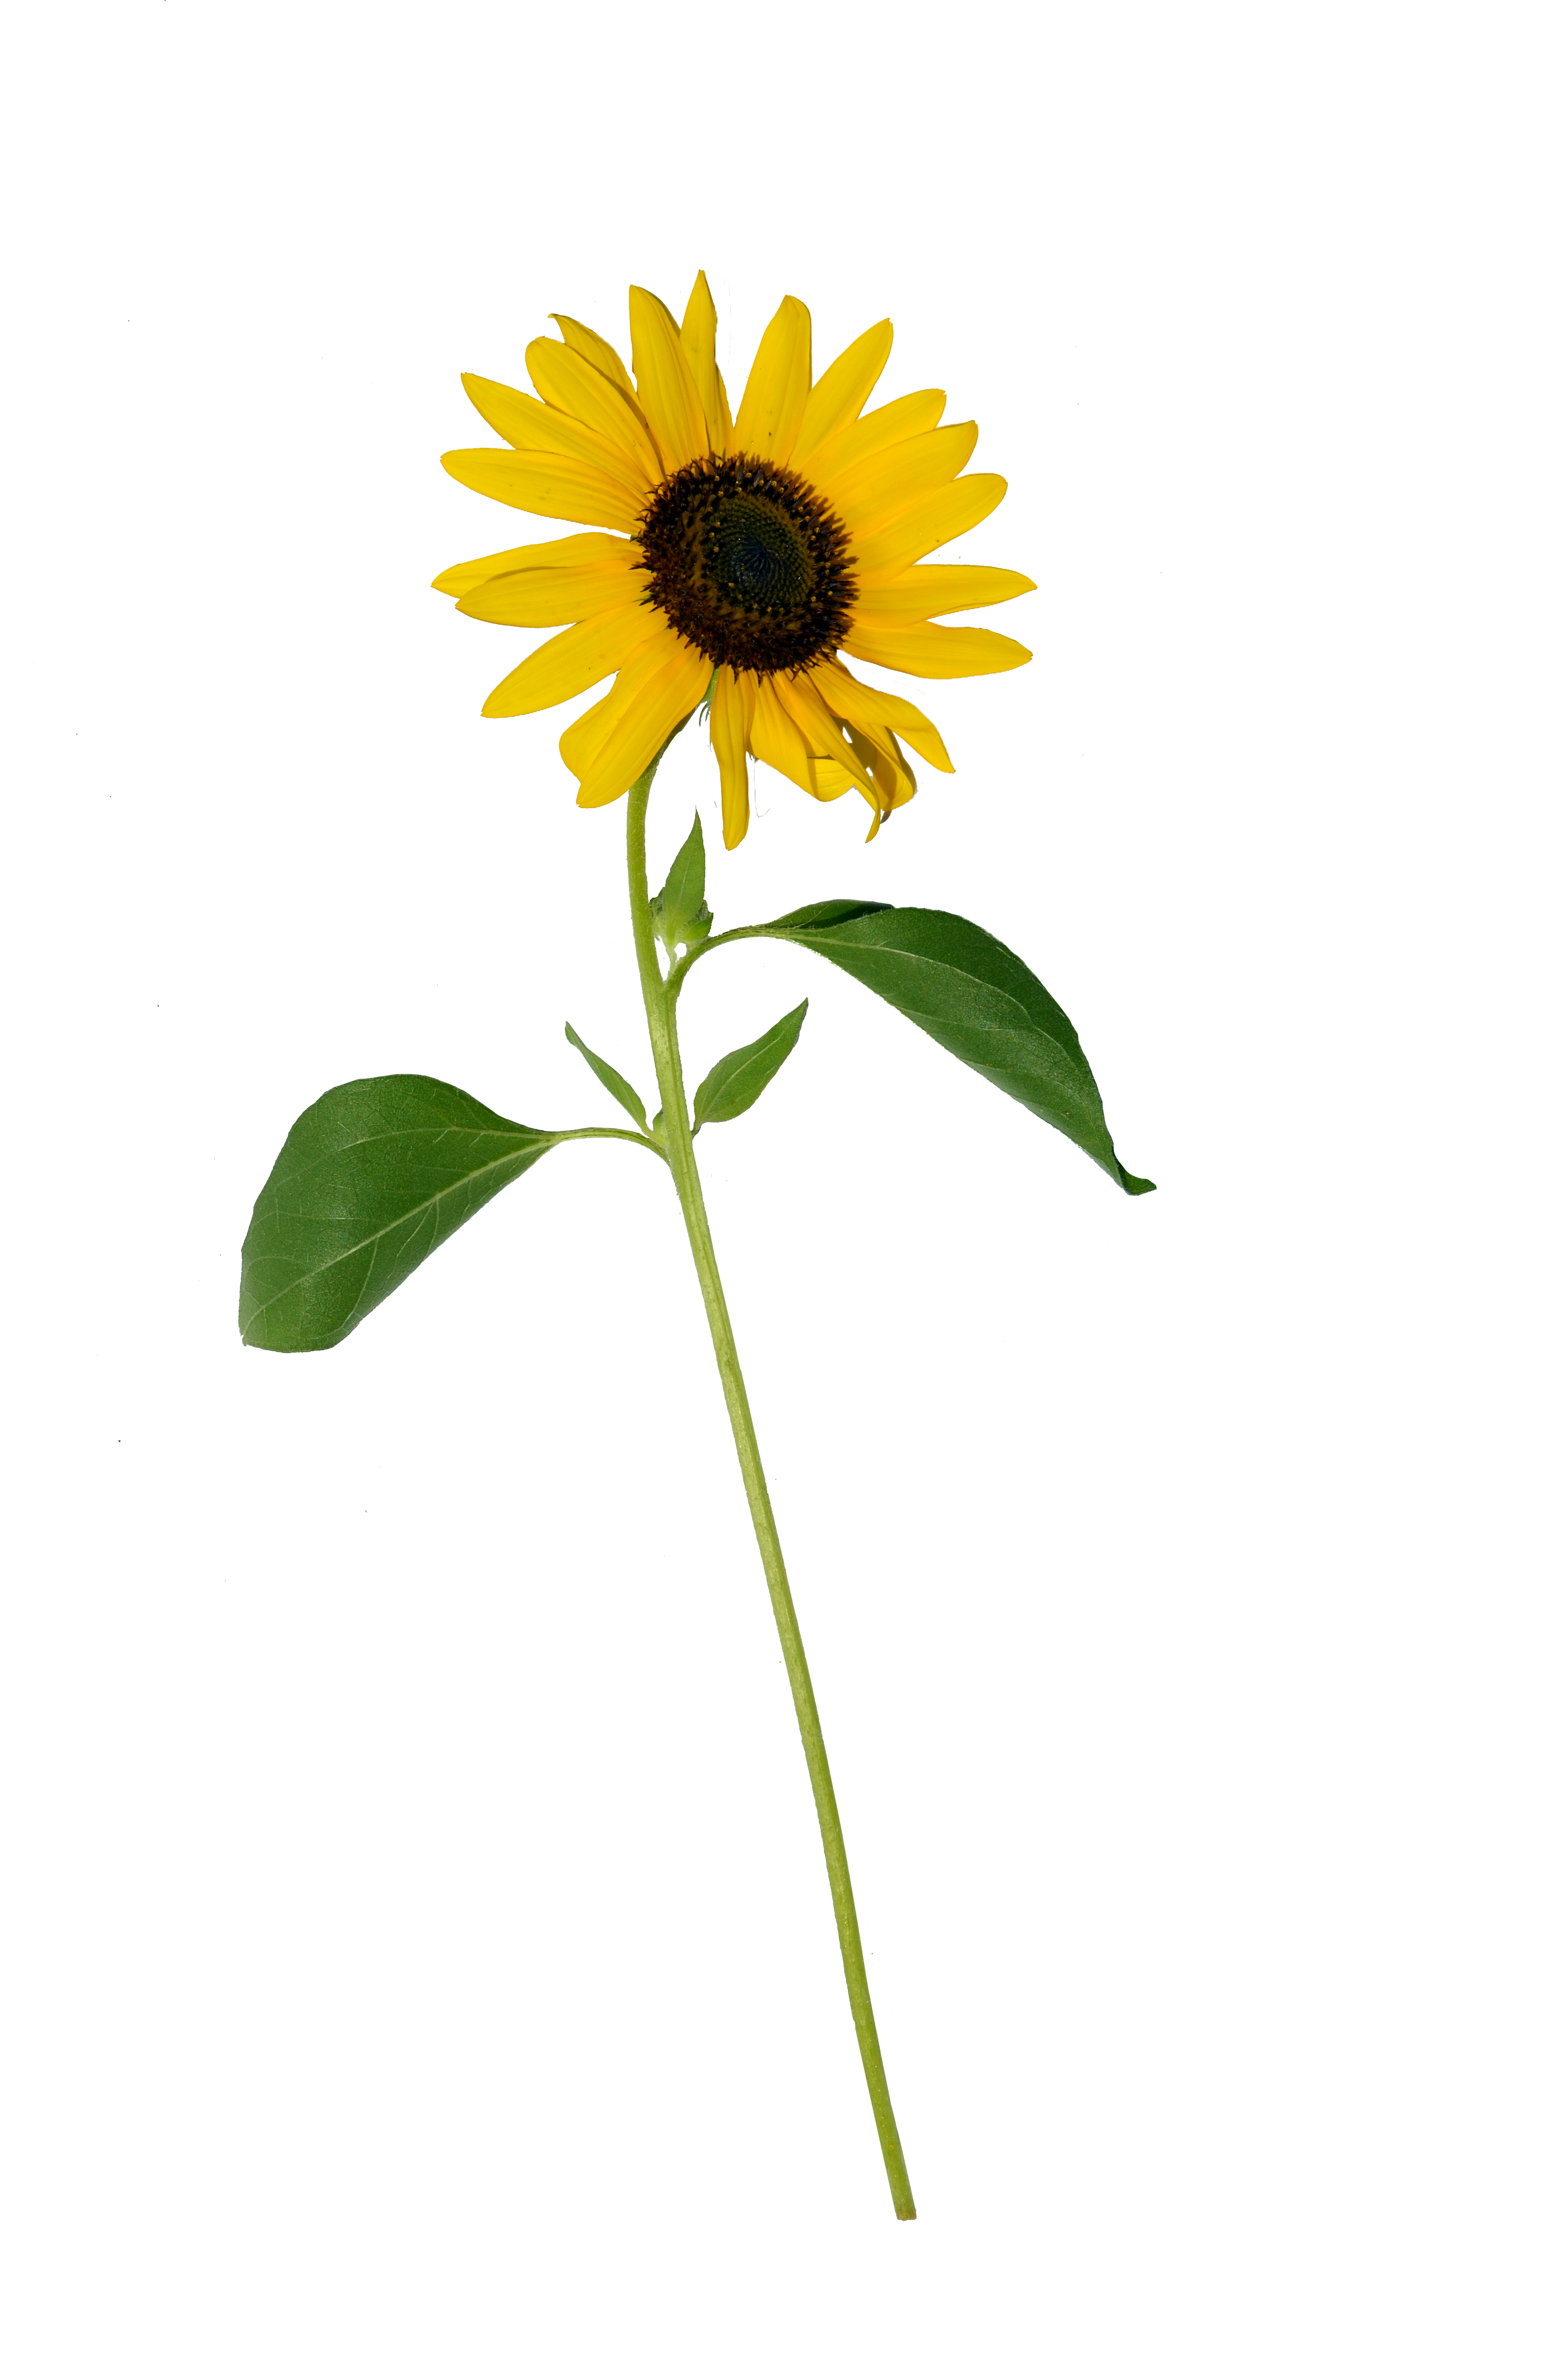 Sunflower Single PNG Stock 0318 copy by annamae22 on DeviantArt